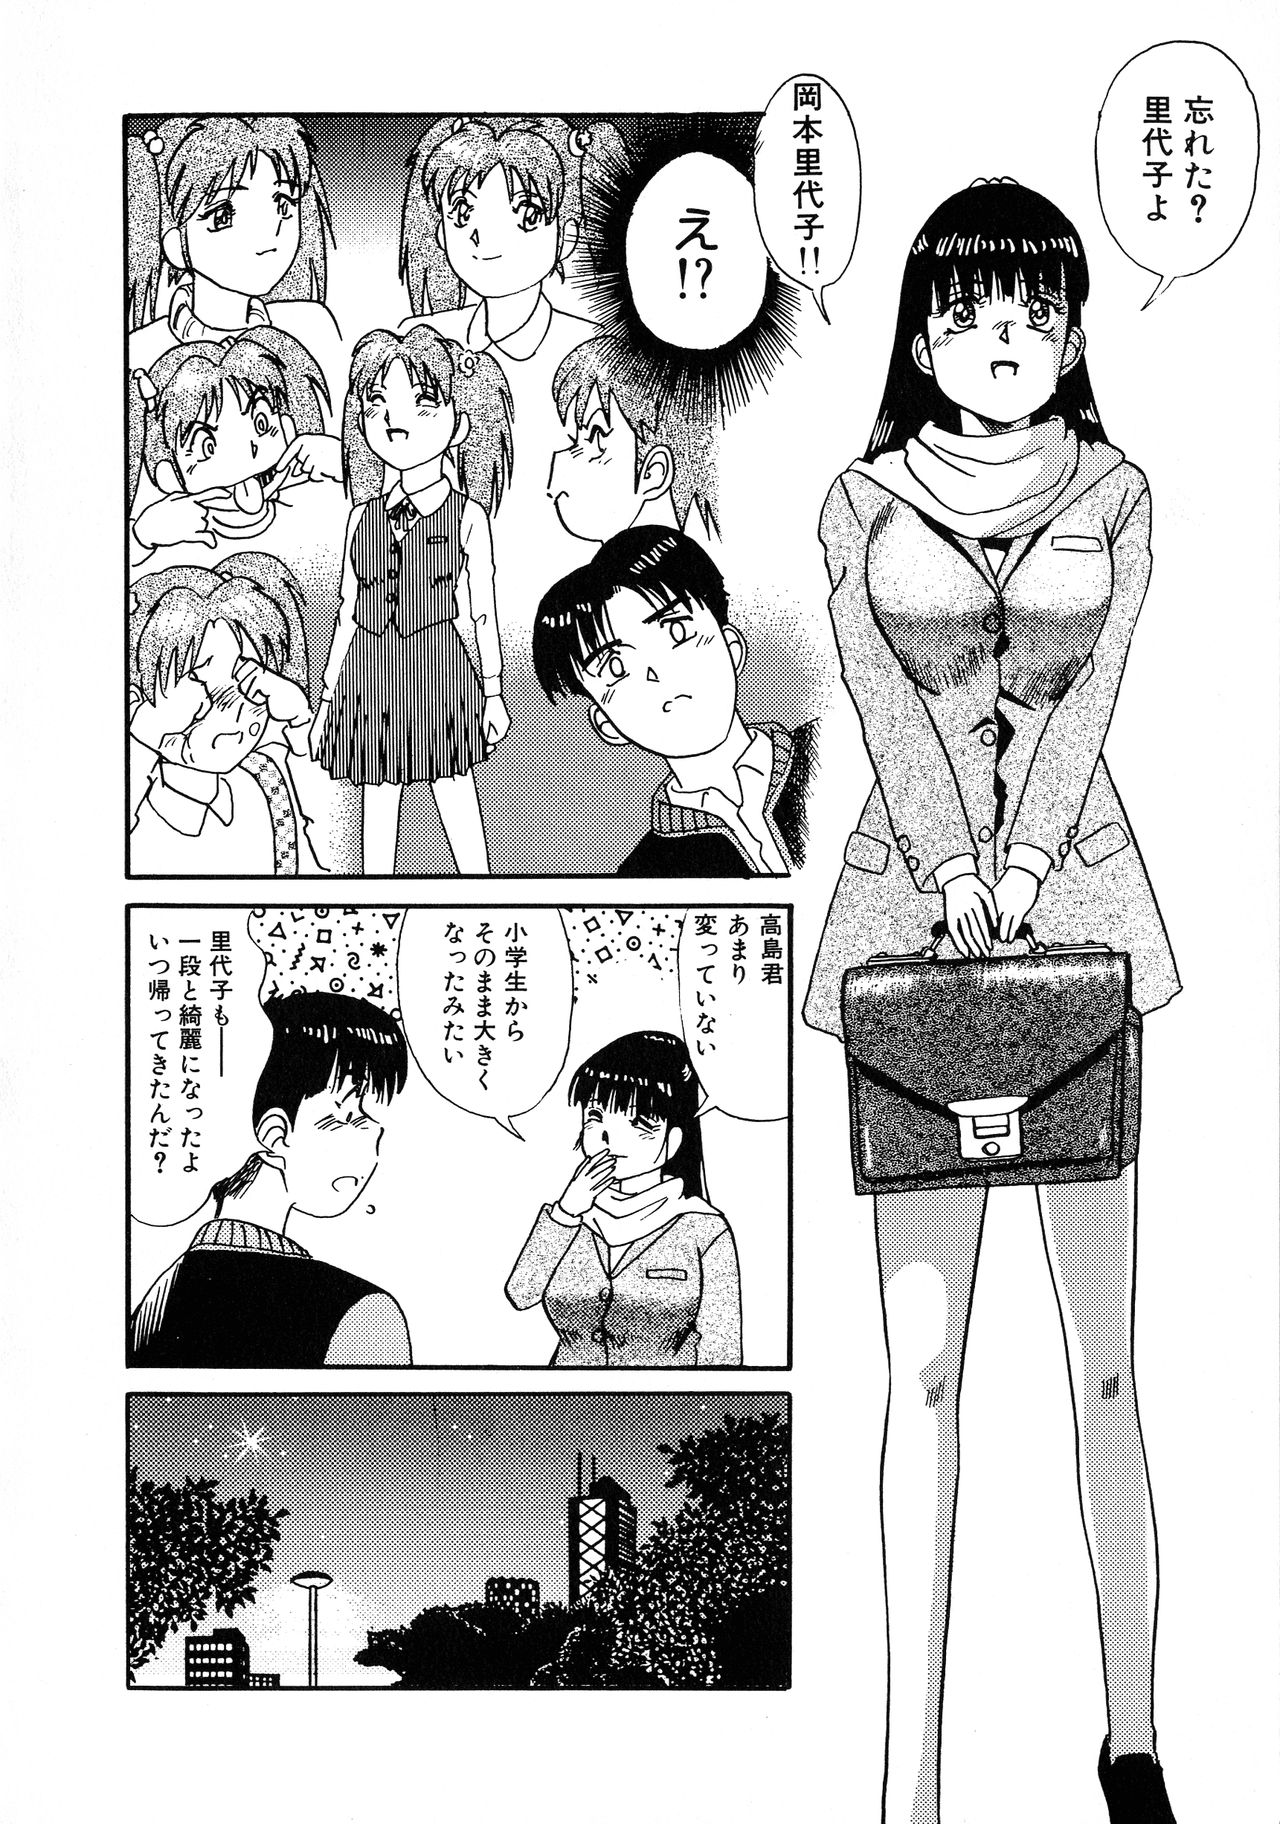 [Anthology] UP Up E-cup 4 page 8 full